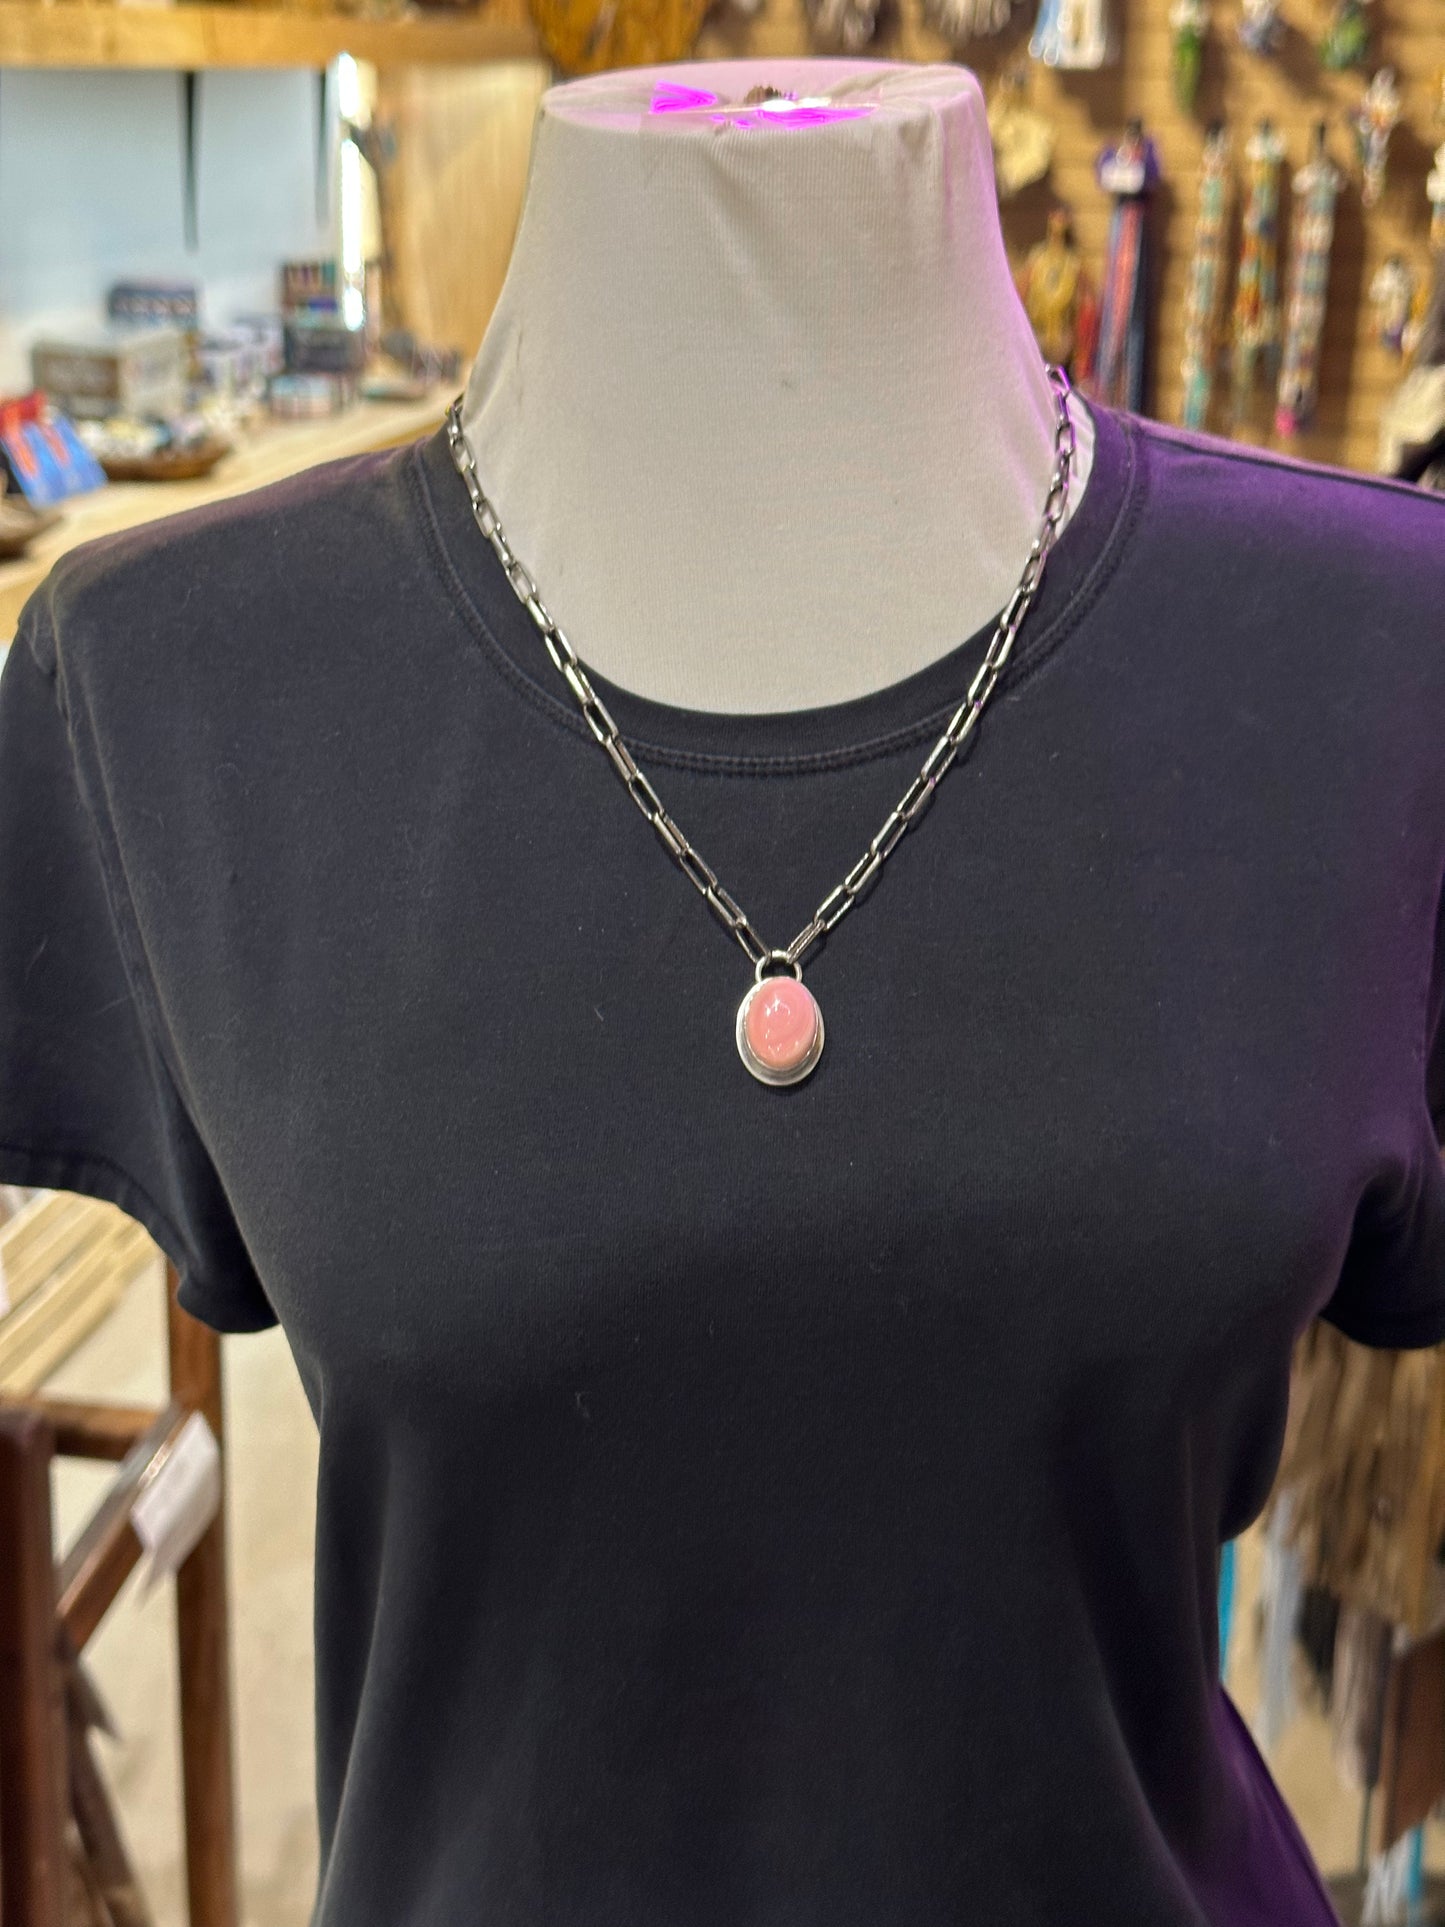 Pink Conch Shell on Paper Clip Chain Necklace